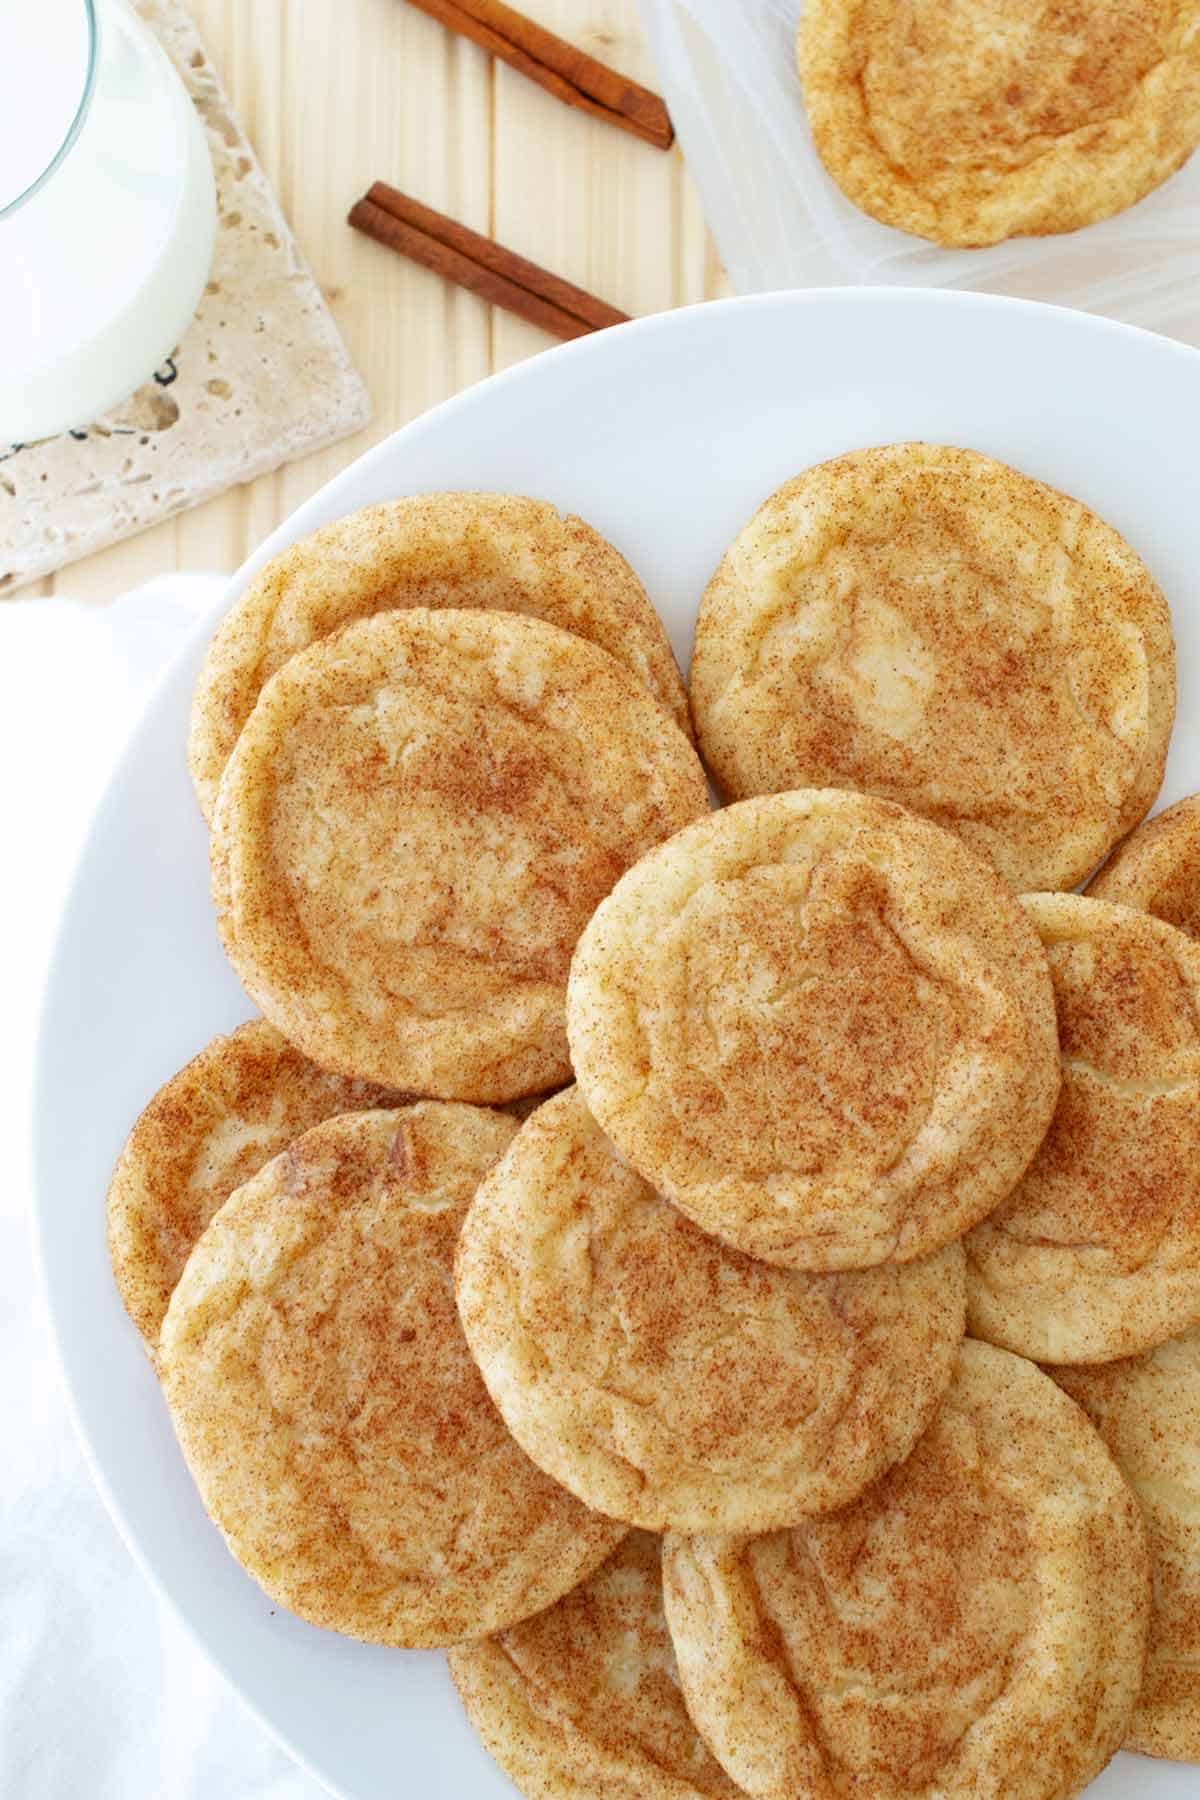 Plate of snickerdoodle cookies made without cream of tartar.